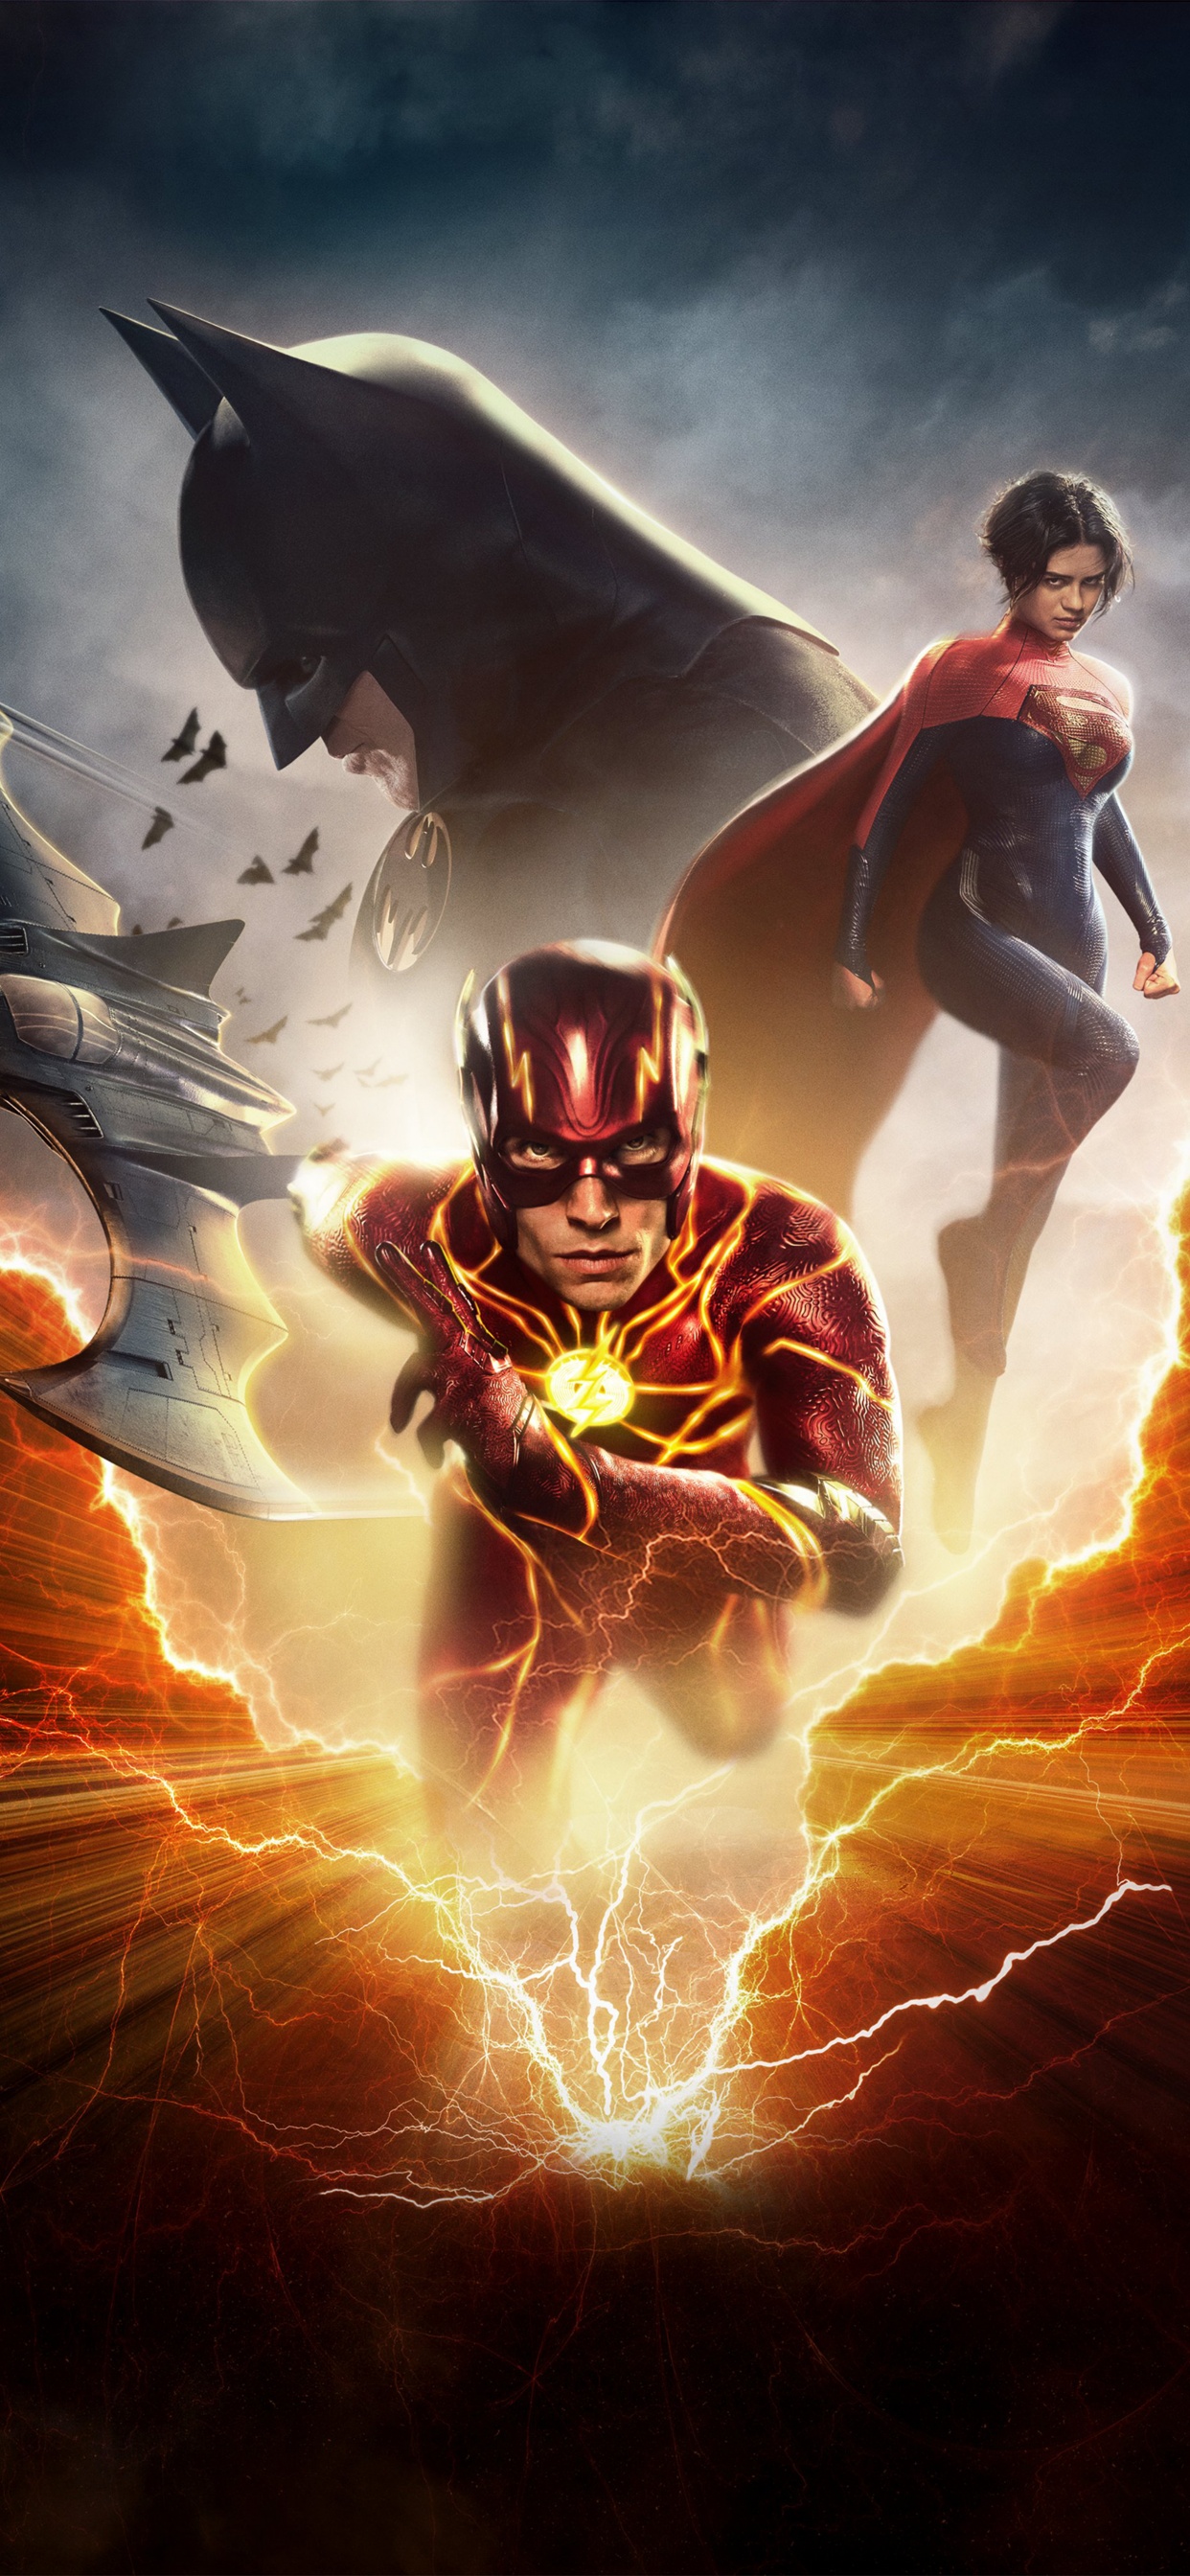 11 Best The Flash wallpapers for iPhone Free 4K download  iGeeksBlog